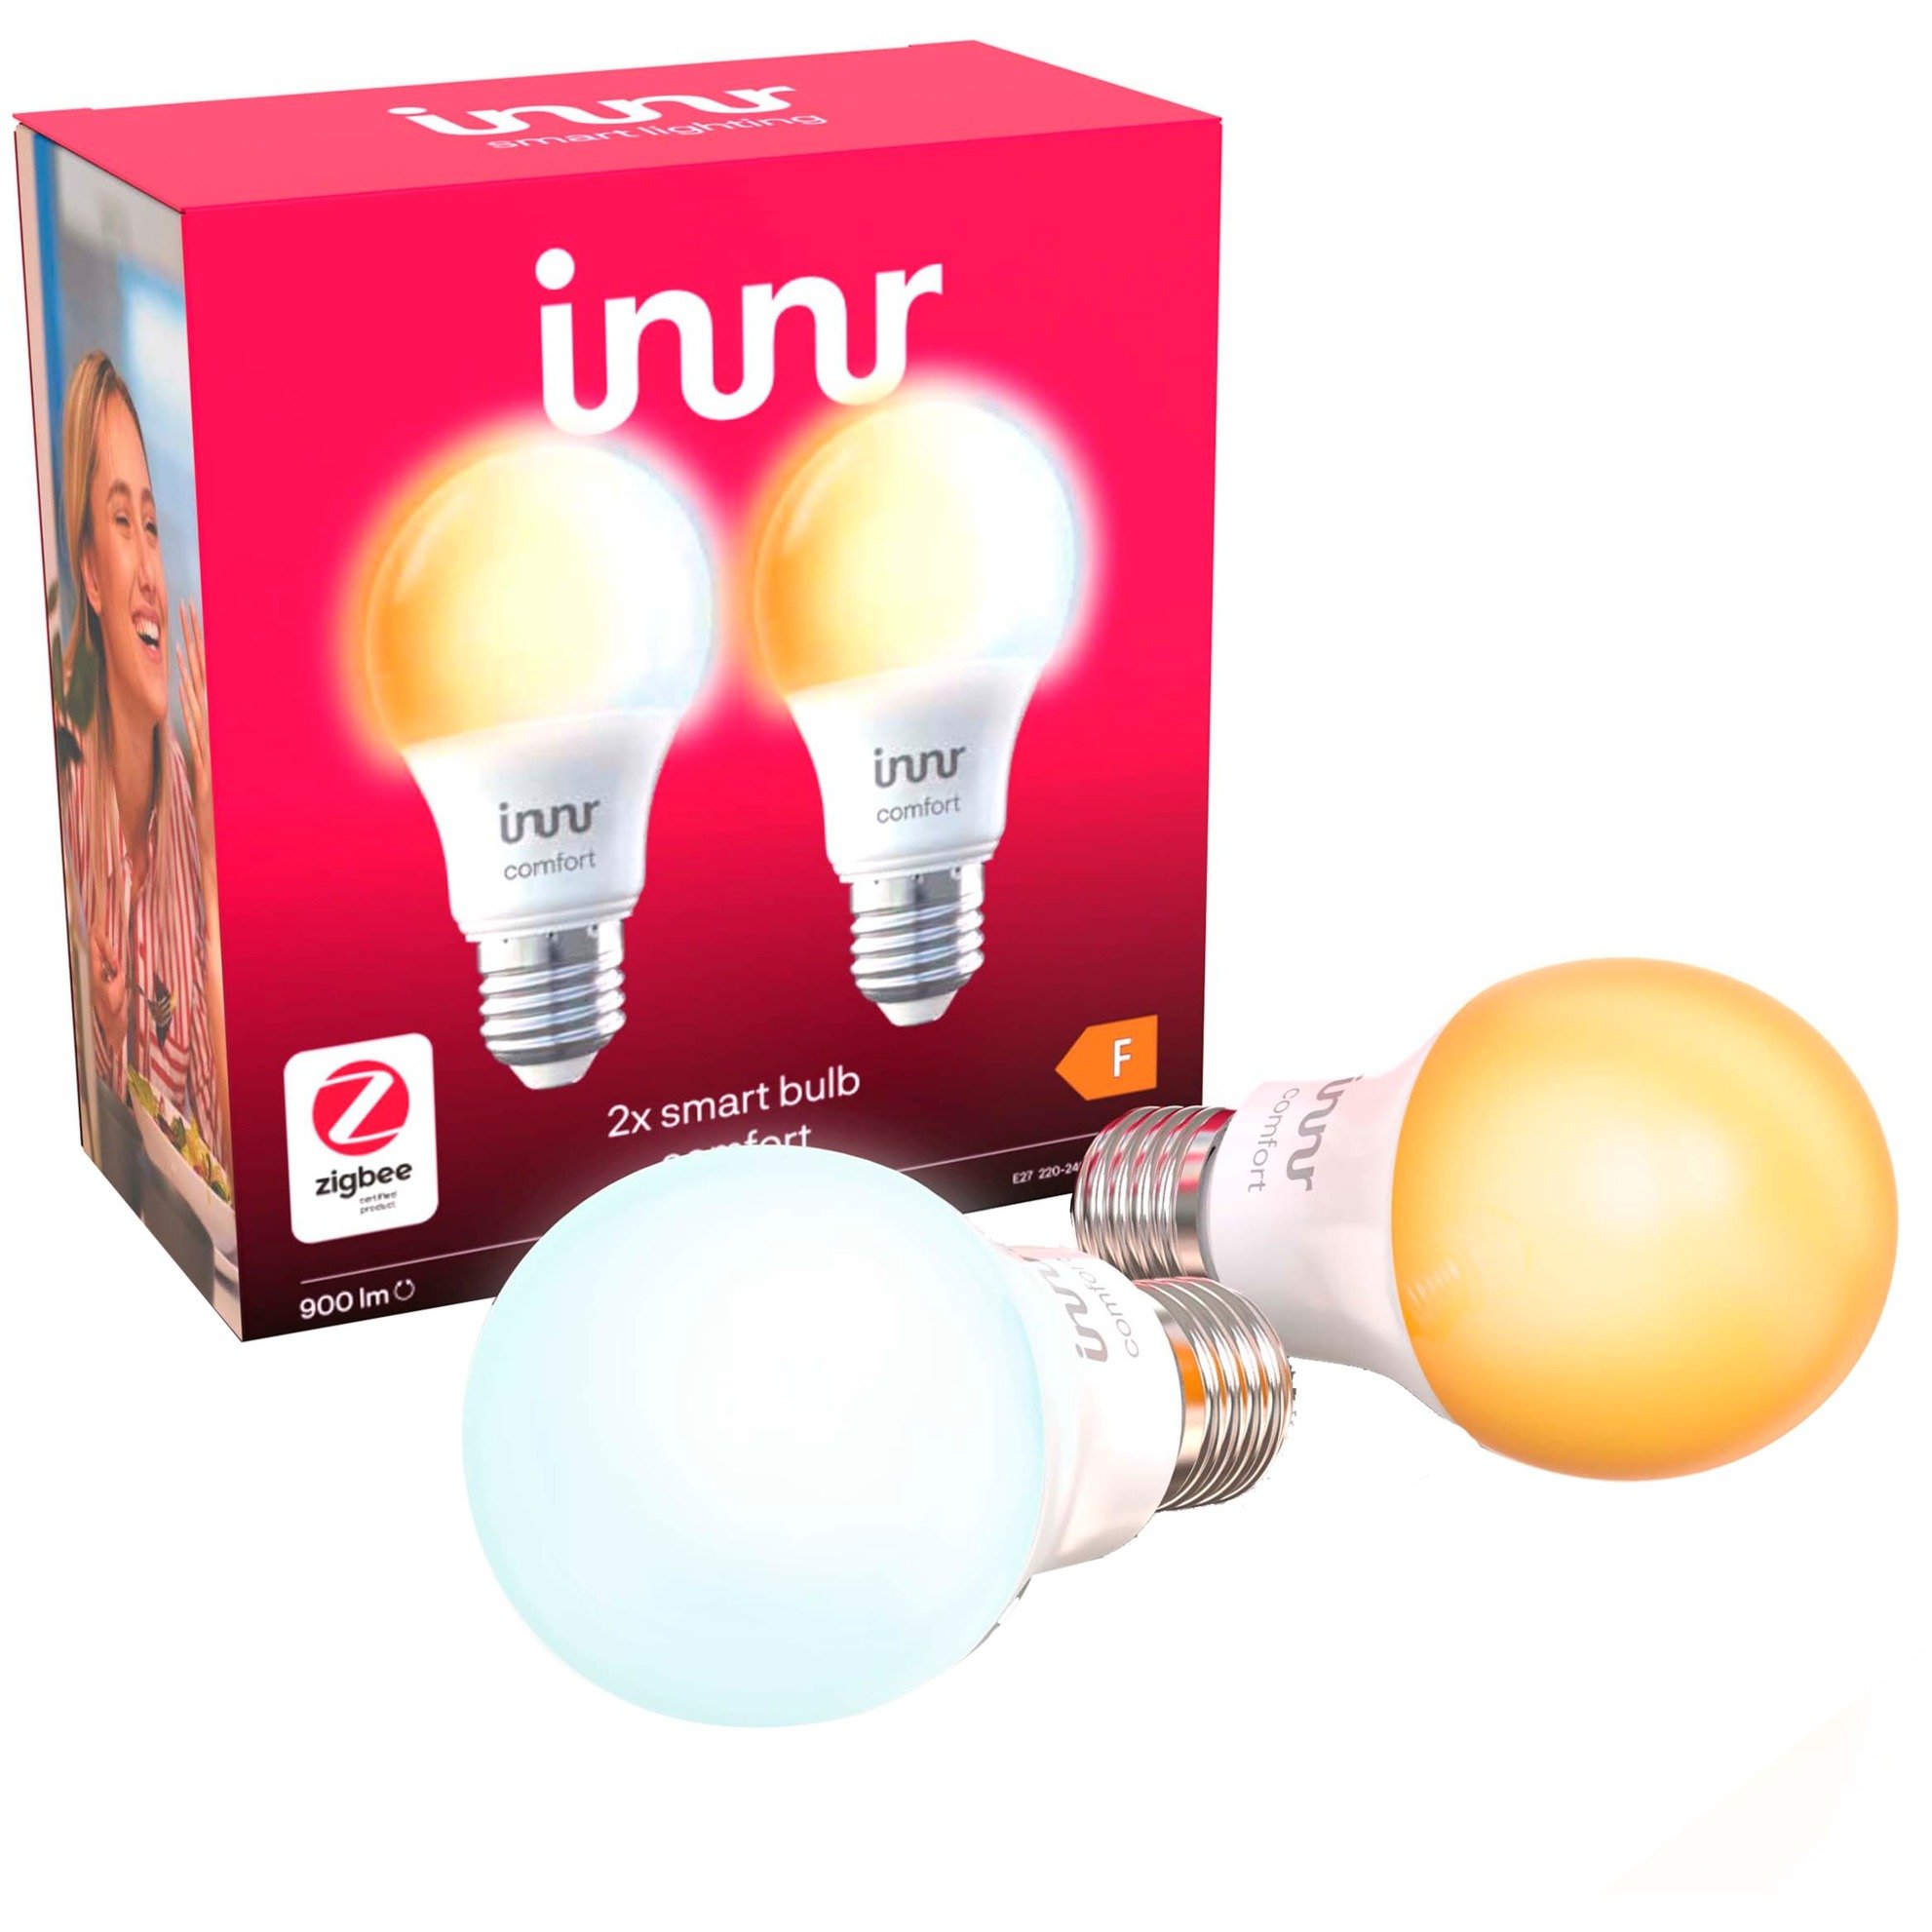 Upgrade your home with Innr smart lights